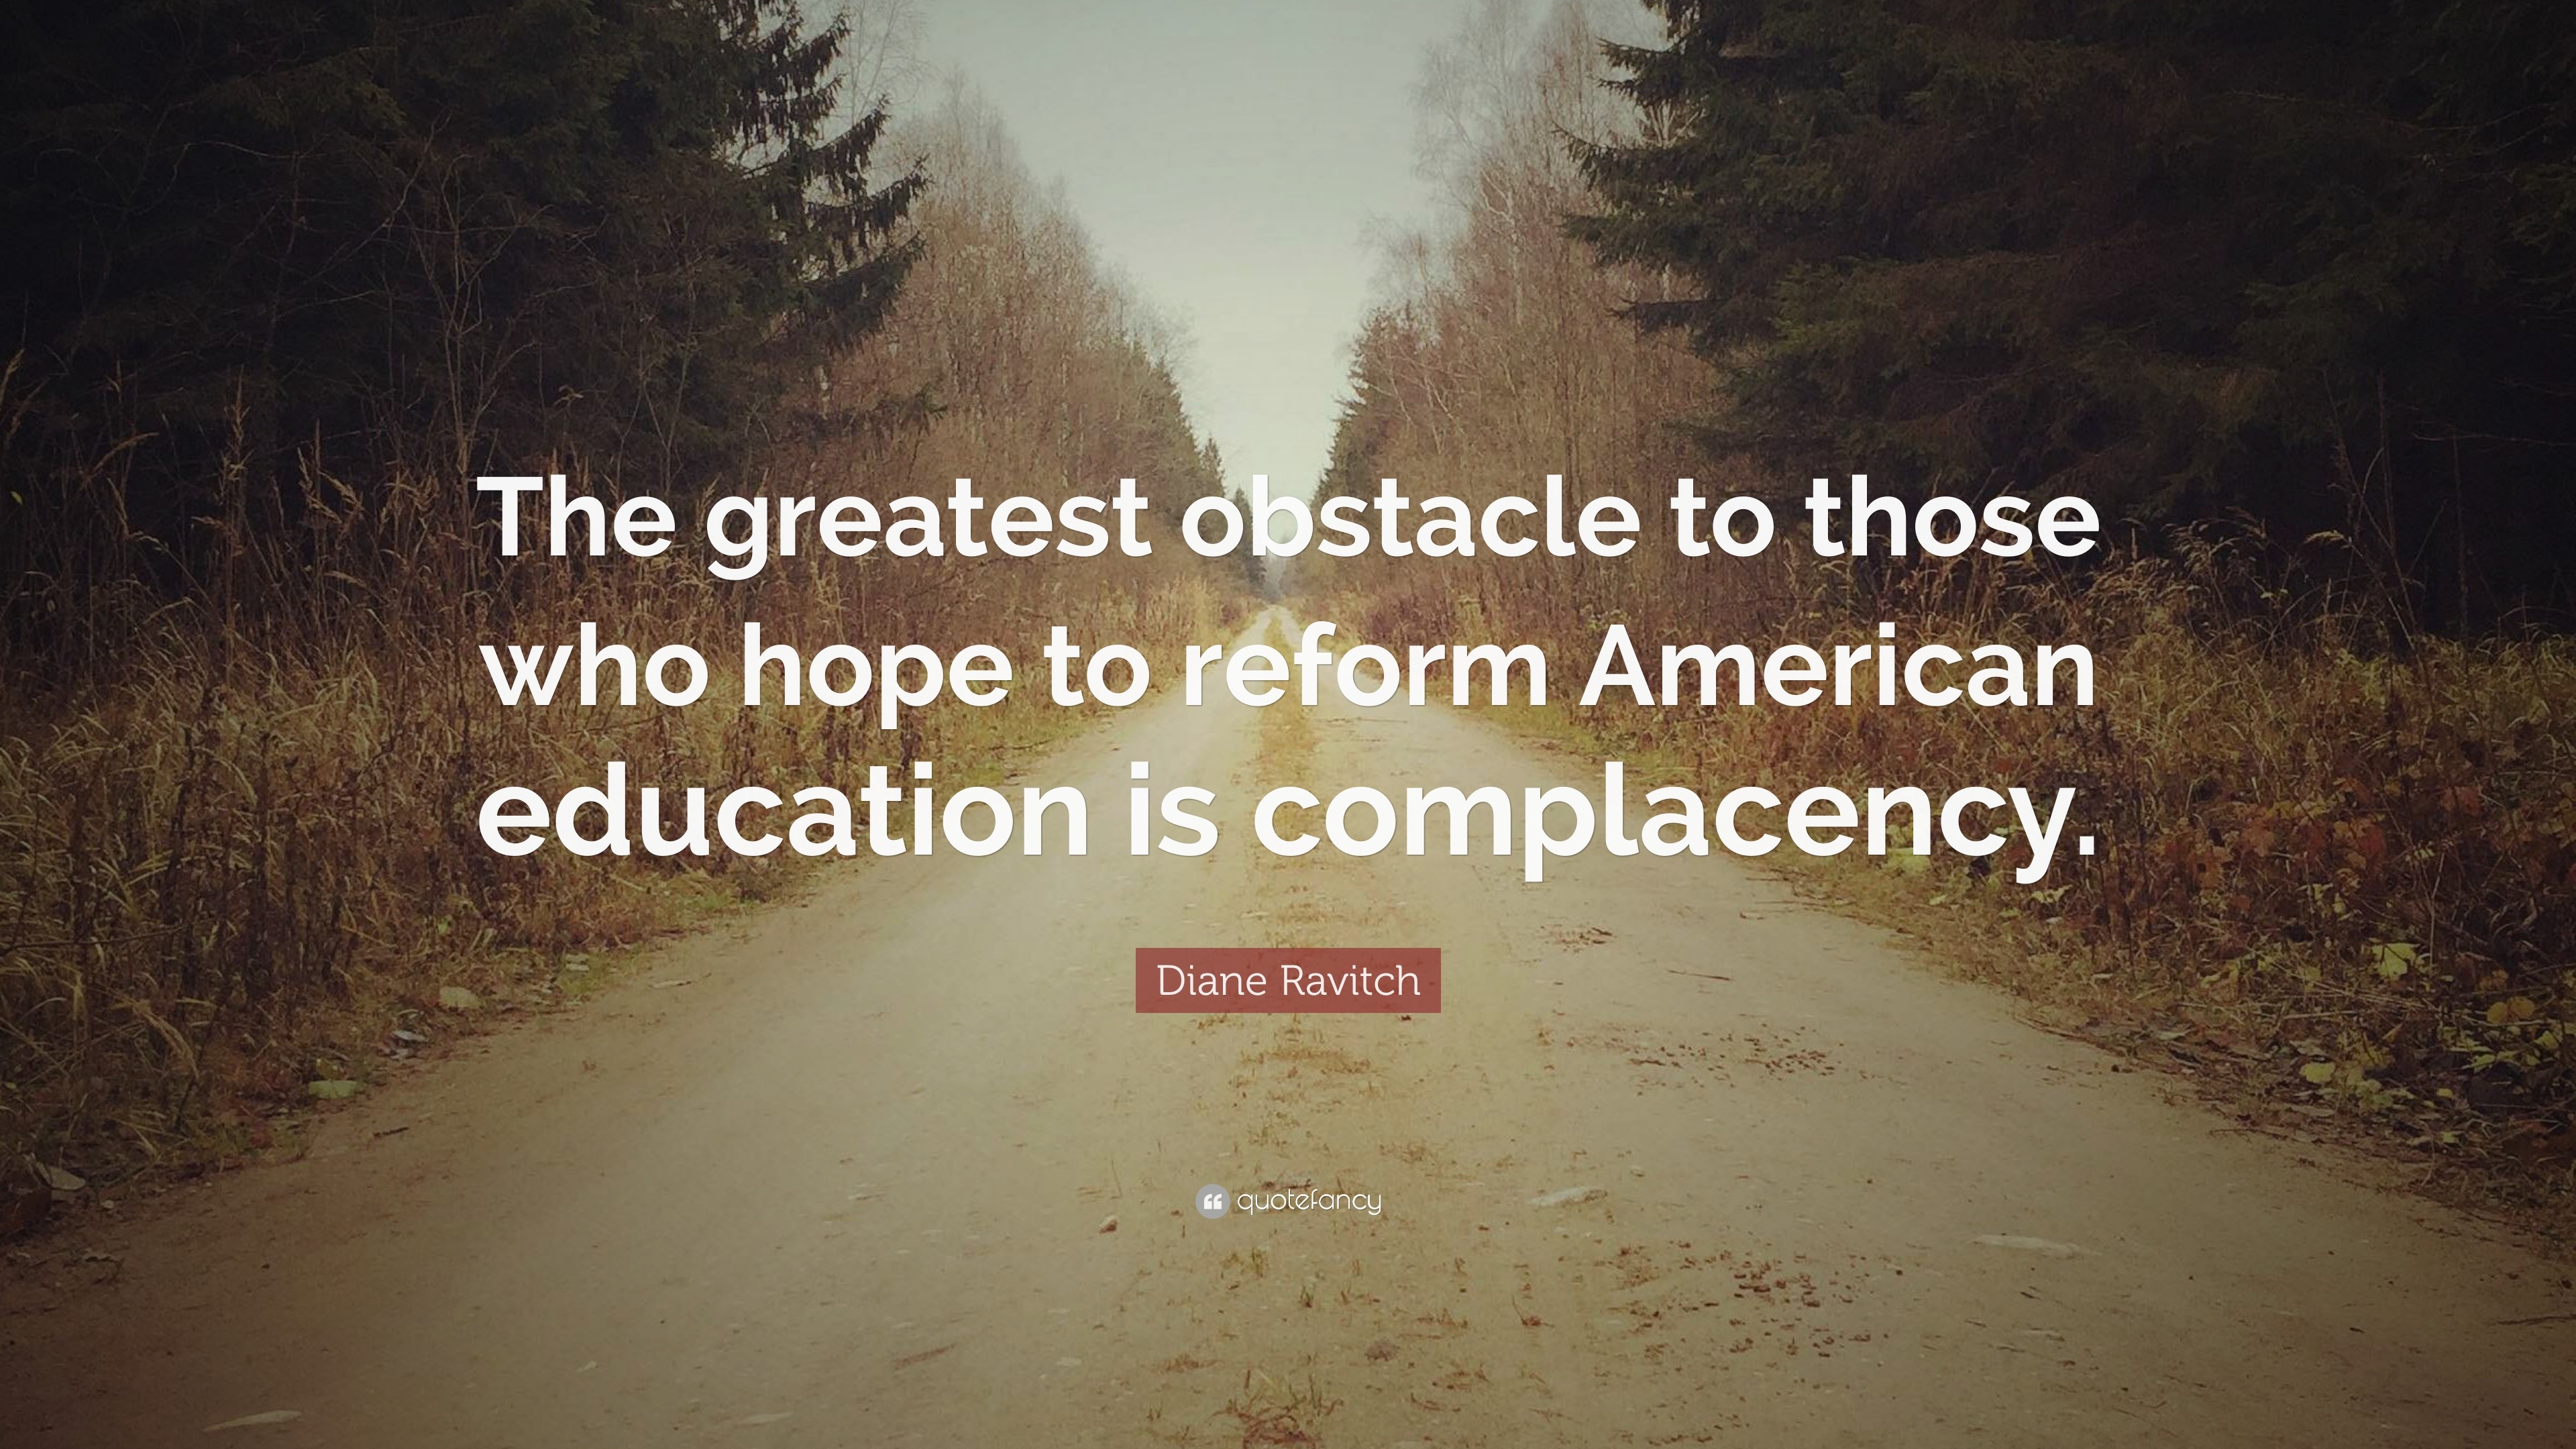 Diane Ravitch Quotes (25 wallpapers) - Quotefancy